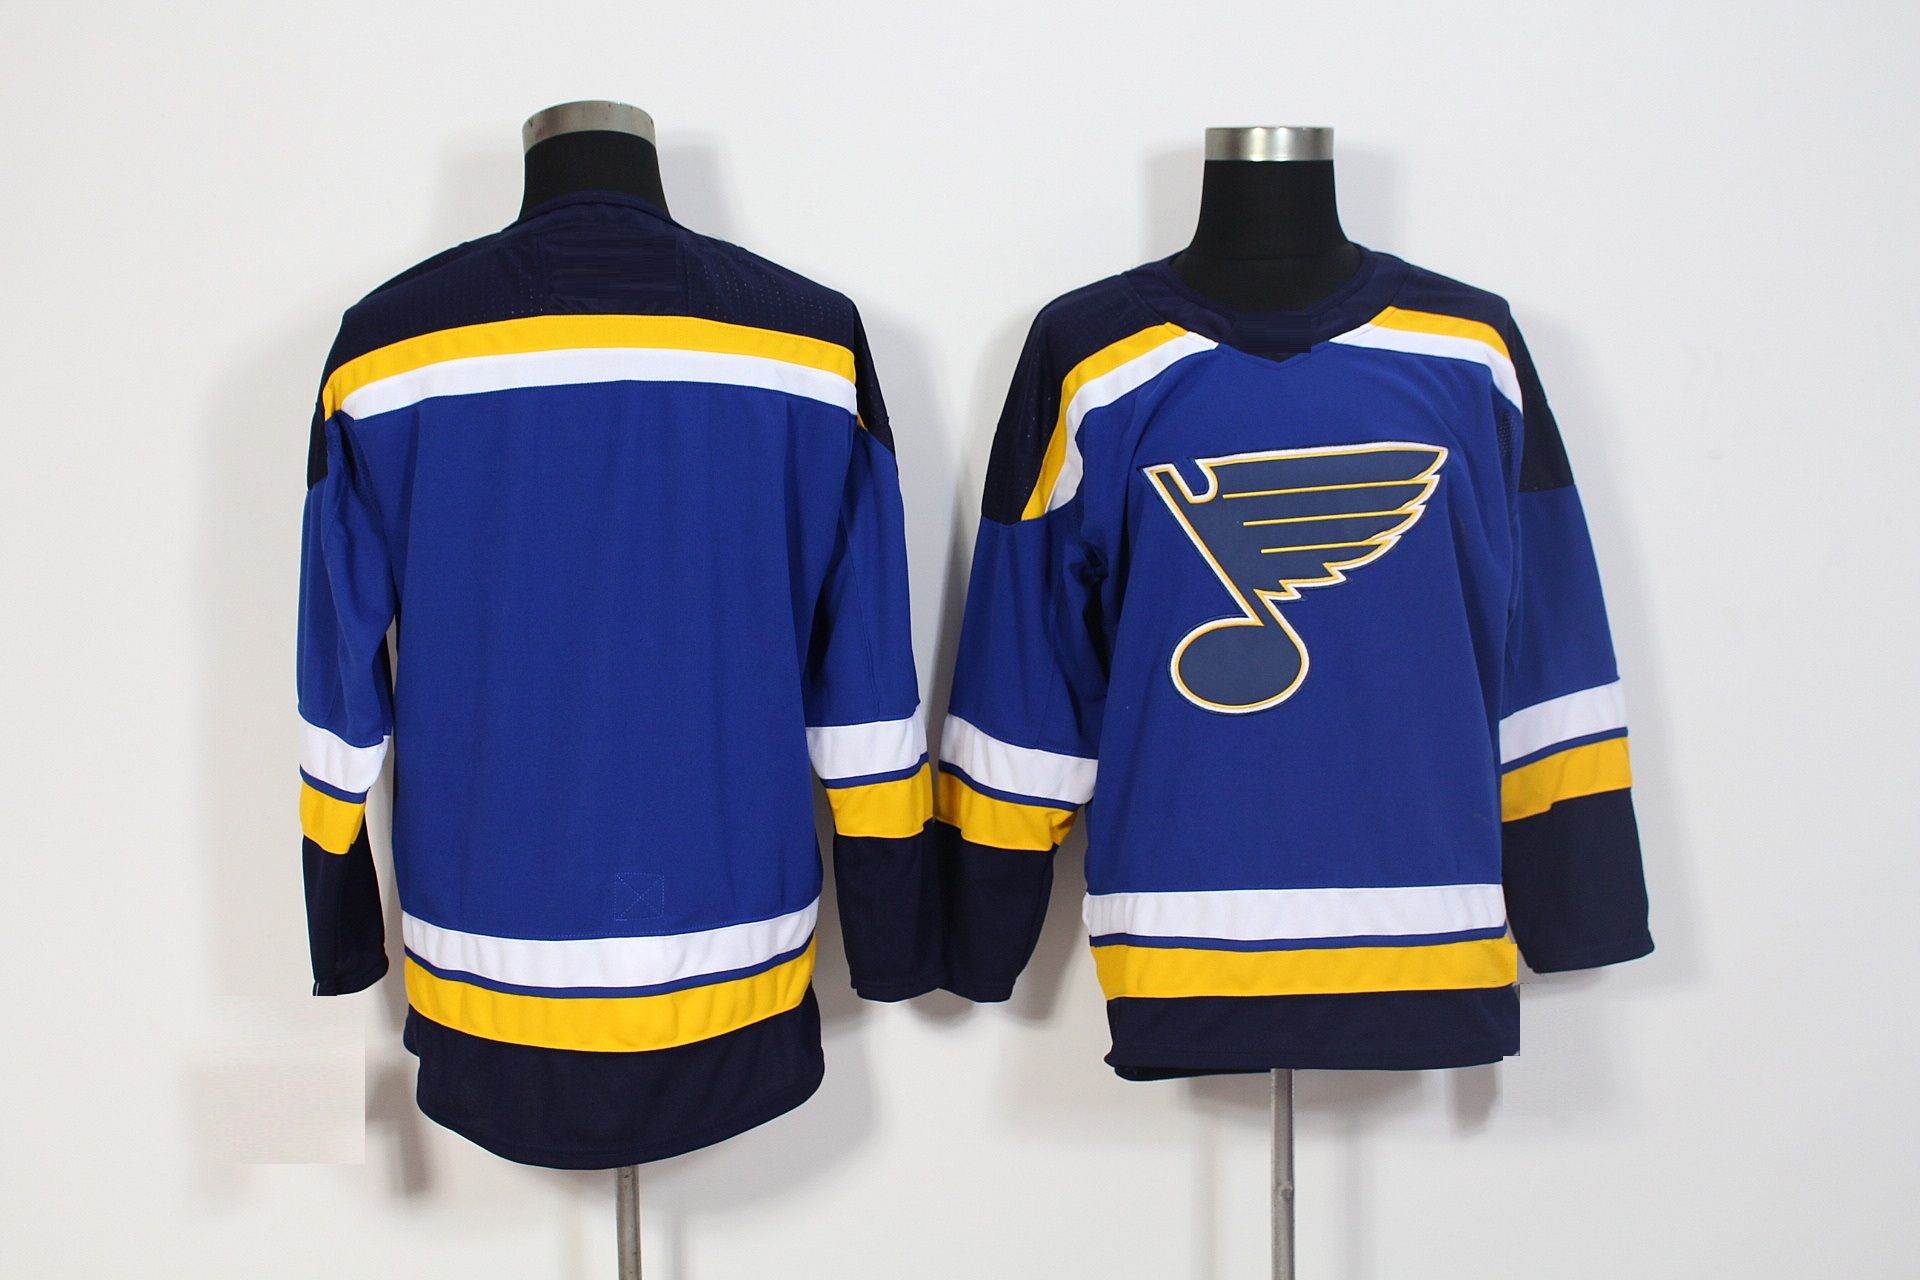 2019 Stanley Cup Final Alternate St. Louis Blues Pat Maroon Hockey Jerseys  Cheap #7 Pat Maroon Home Blue Stitched Hockey Shirts S XXXL From  Redtradesport, $34.66